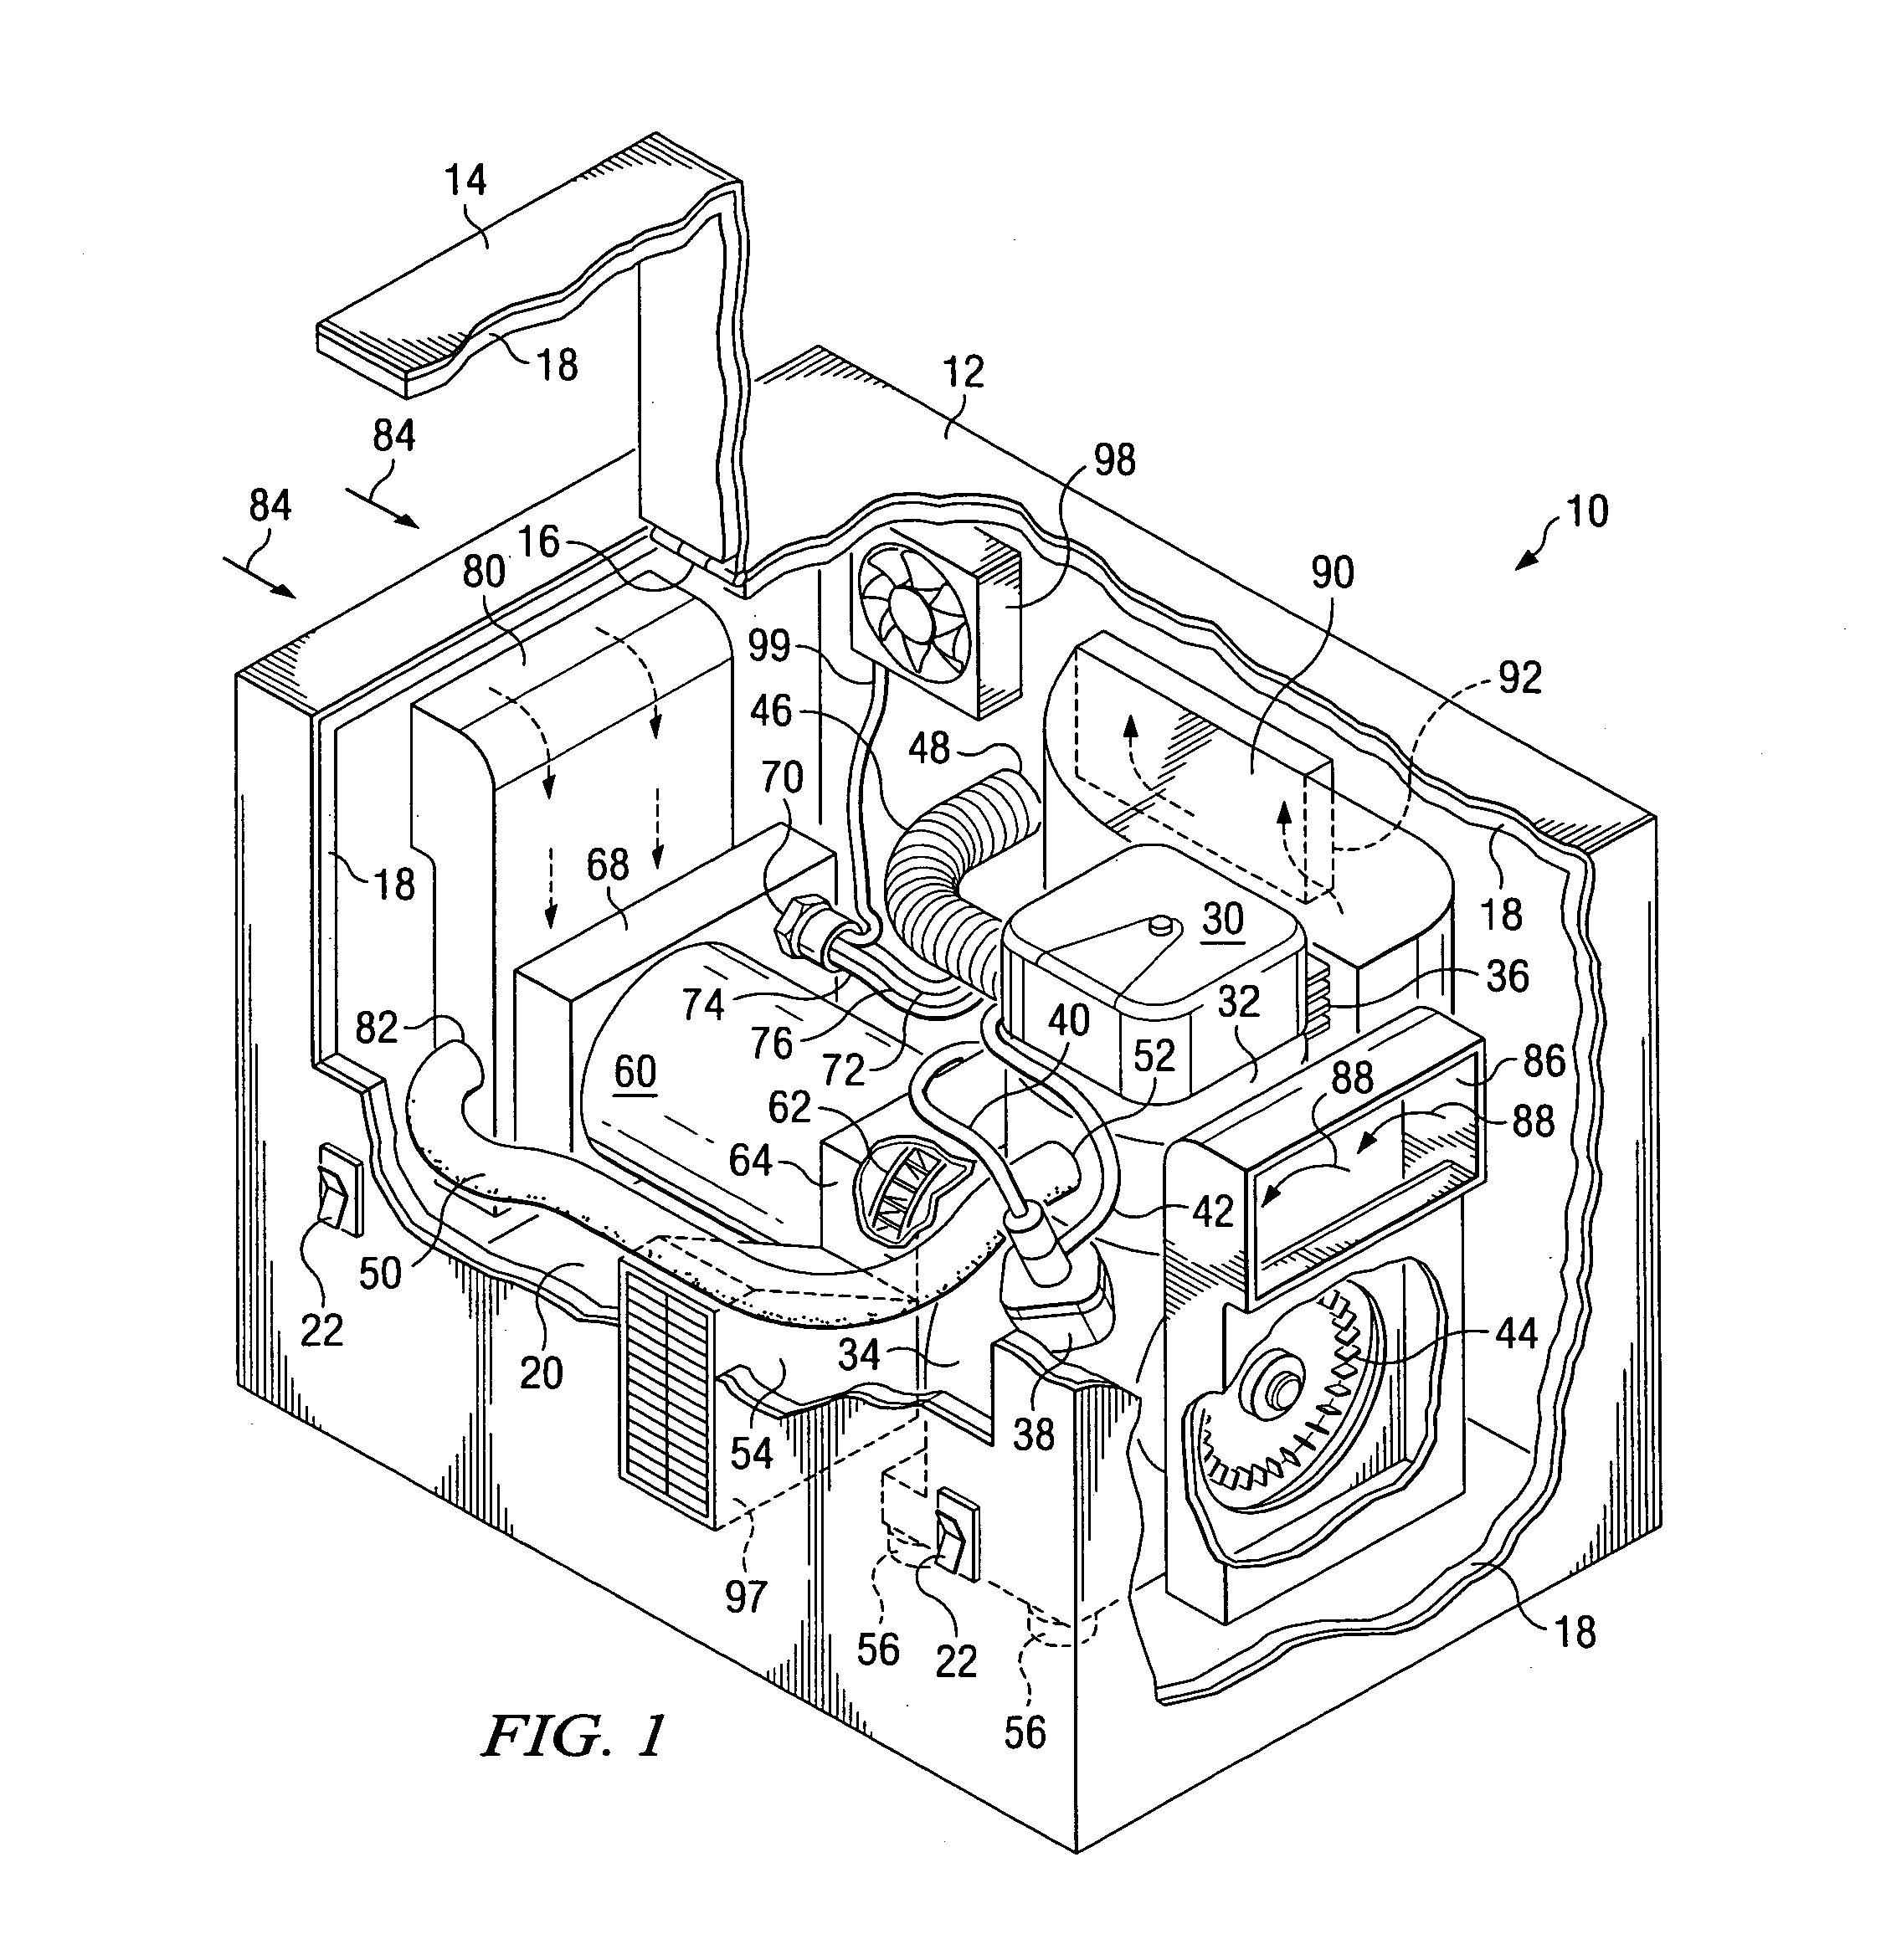 Auxiliary heating and air conditioning unit for a diesel powered transport vehicle